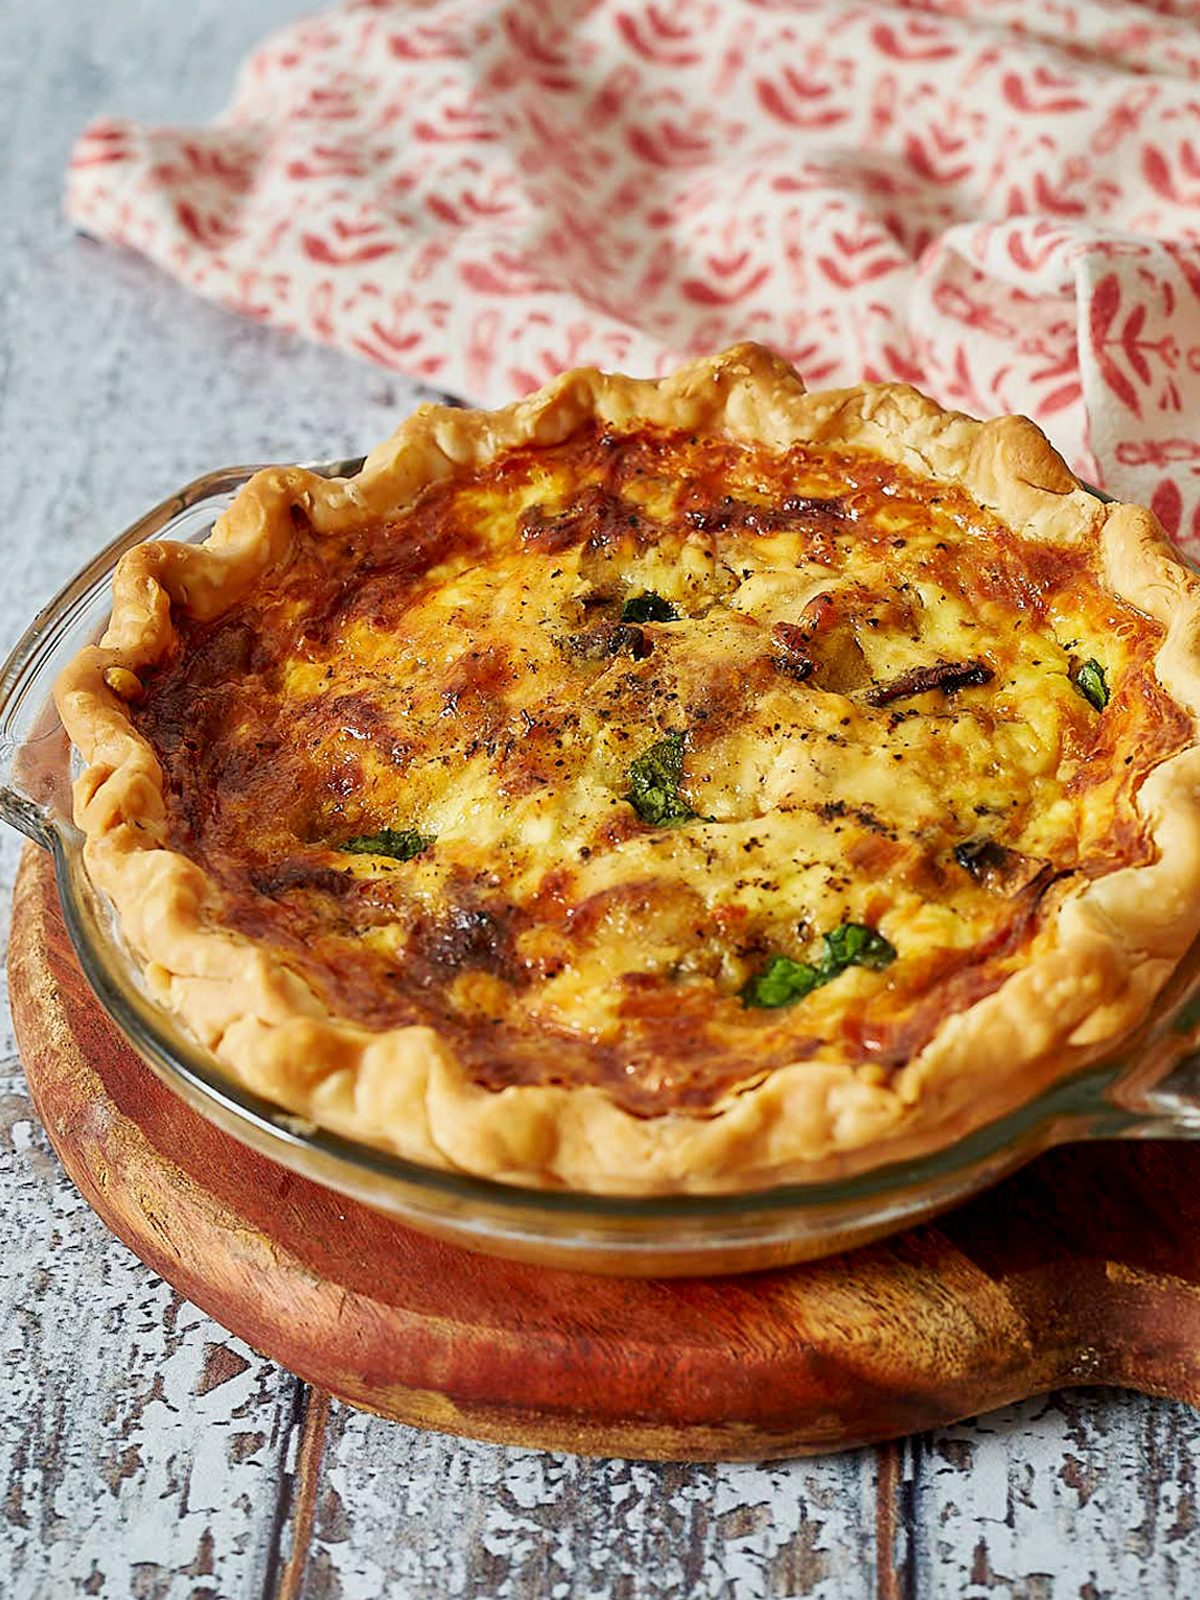 Baked quiche with golden crust and top.